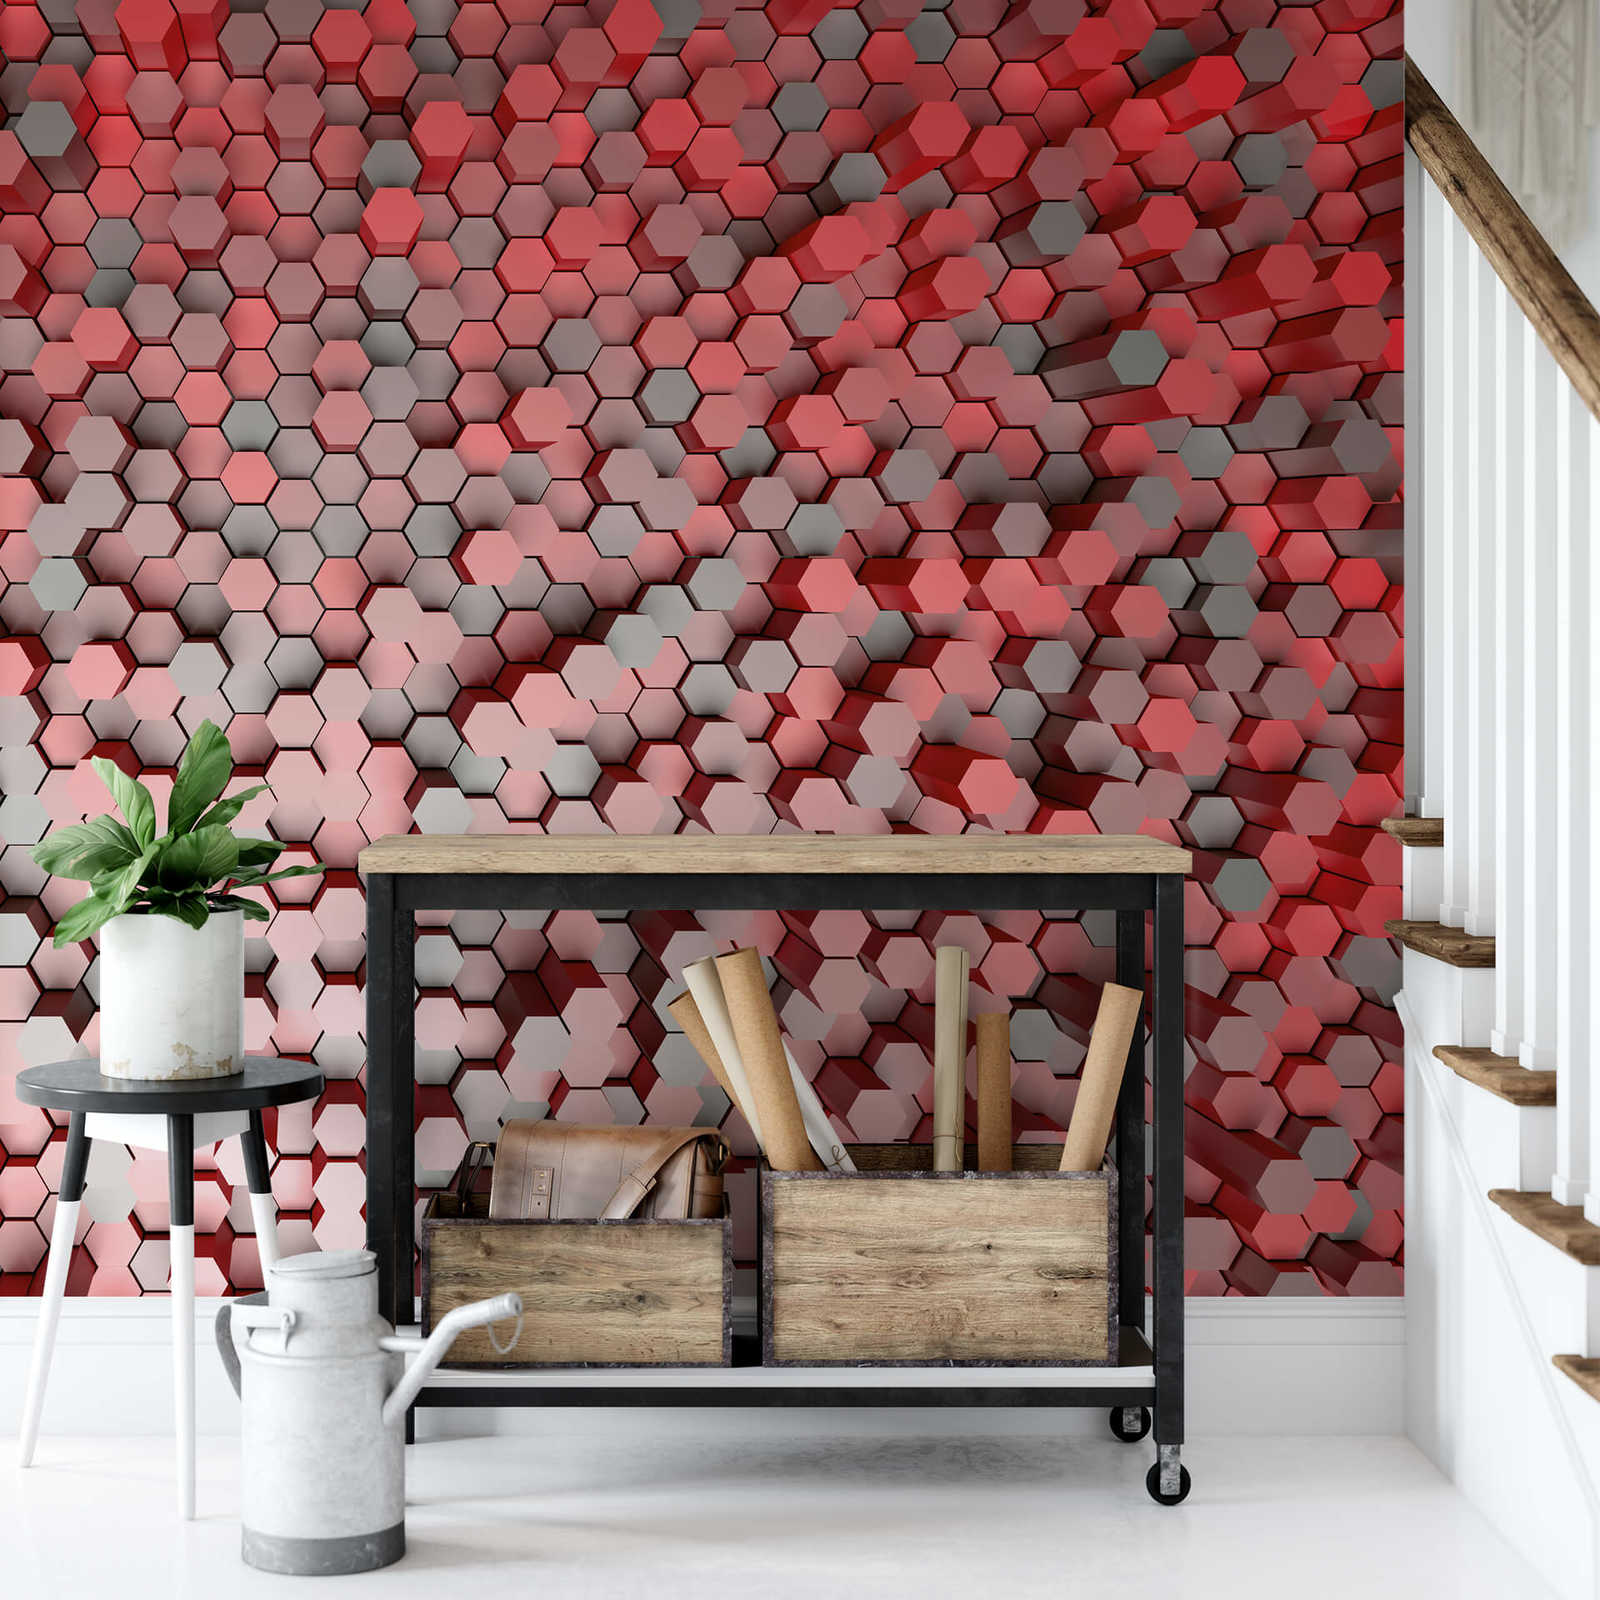             Graphic mural 3D Hexagon pattern - red, grey
        